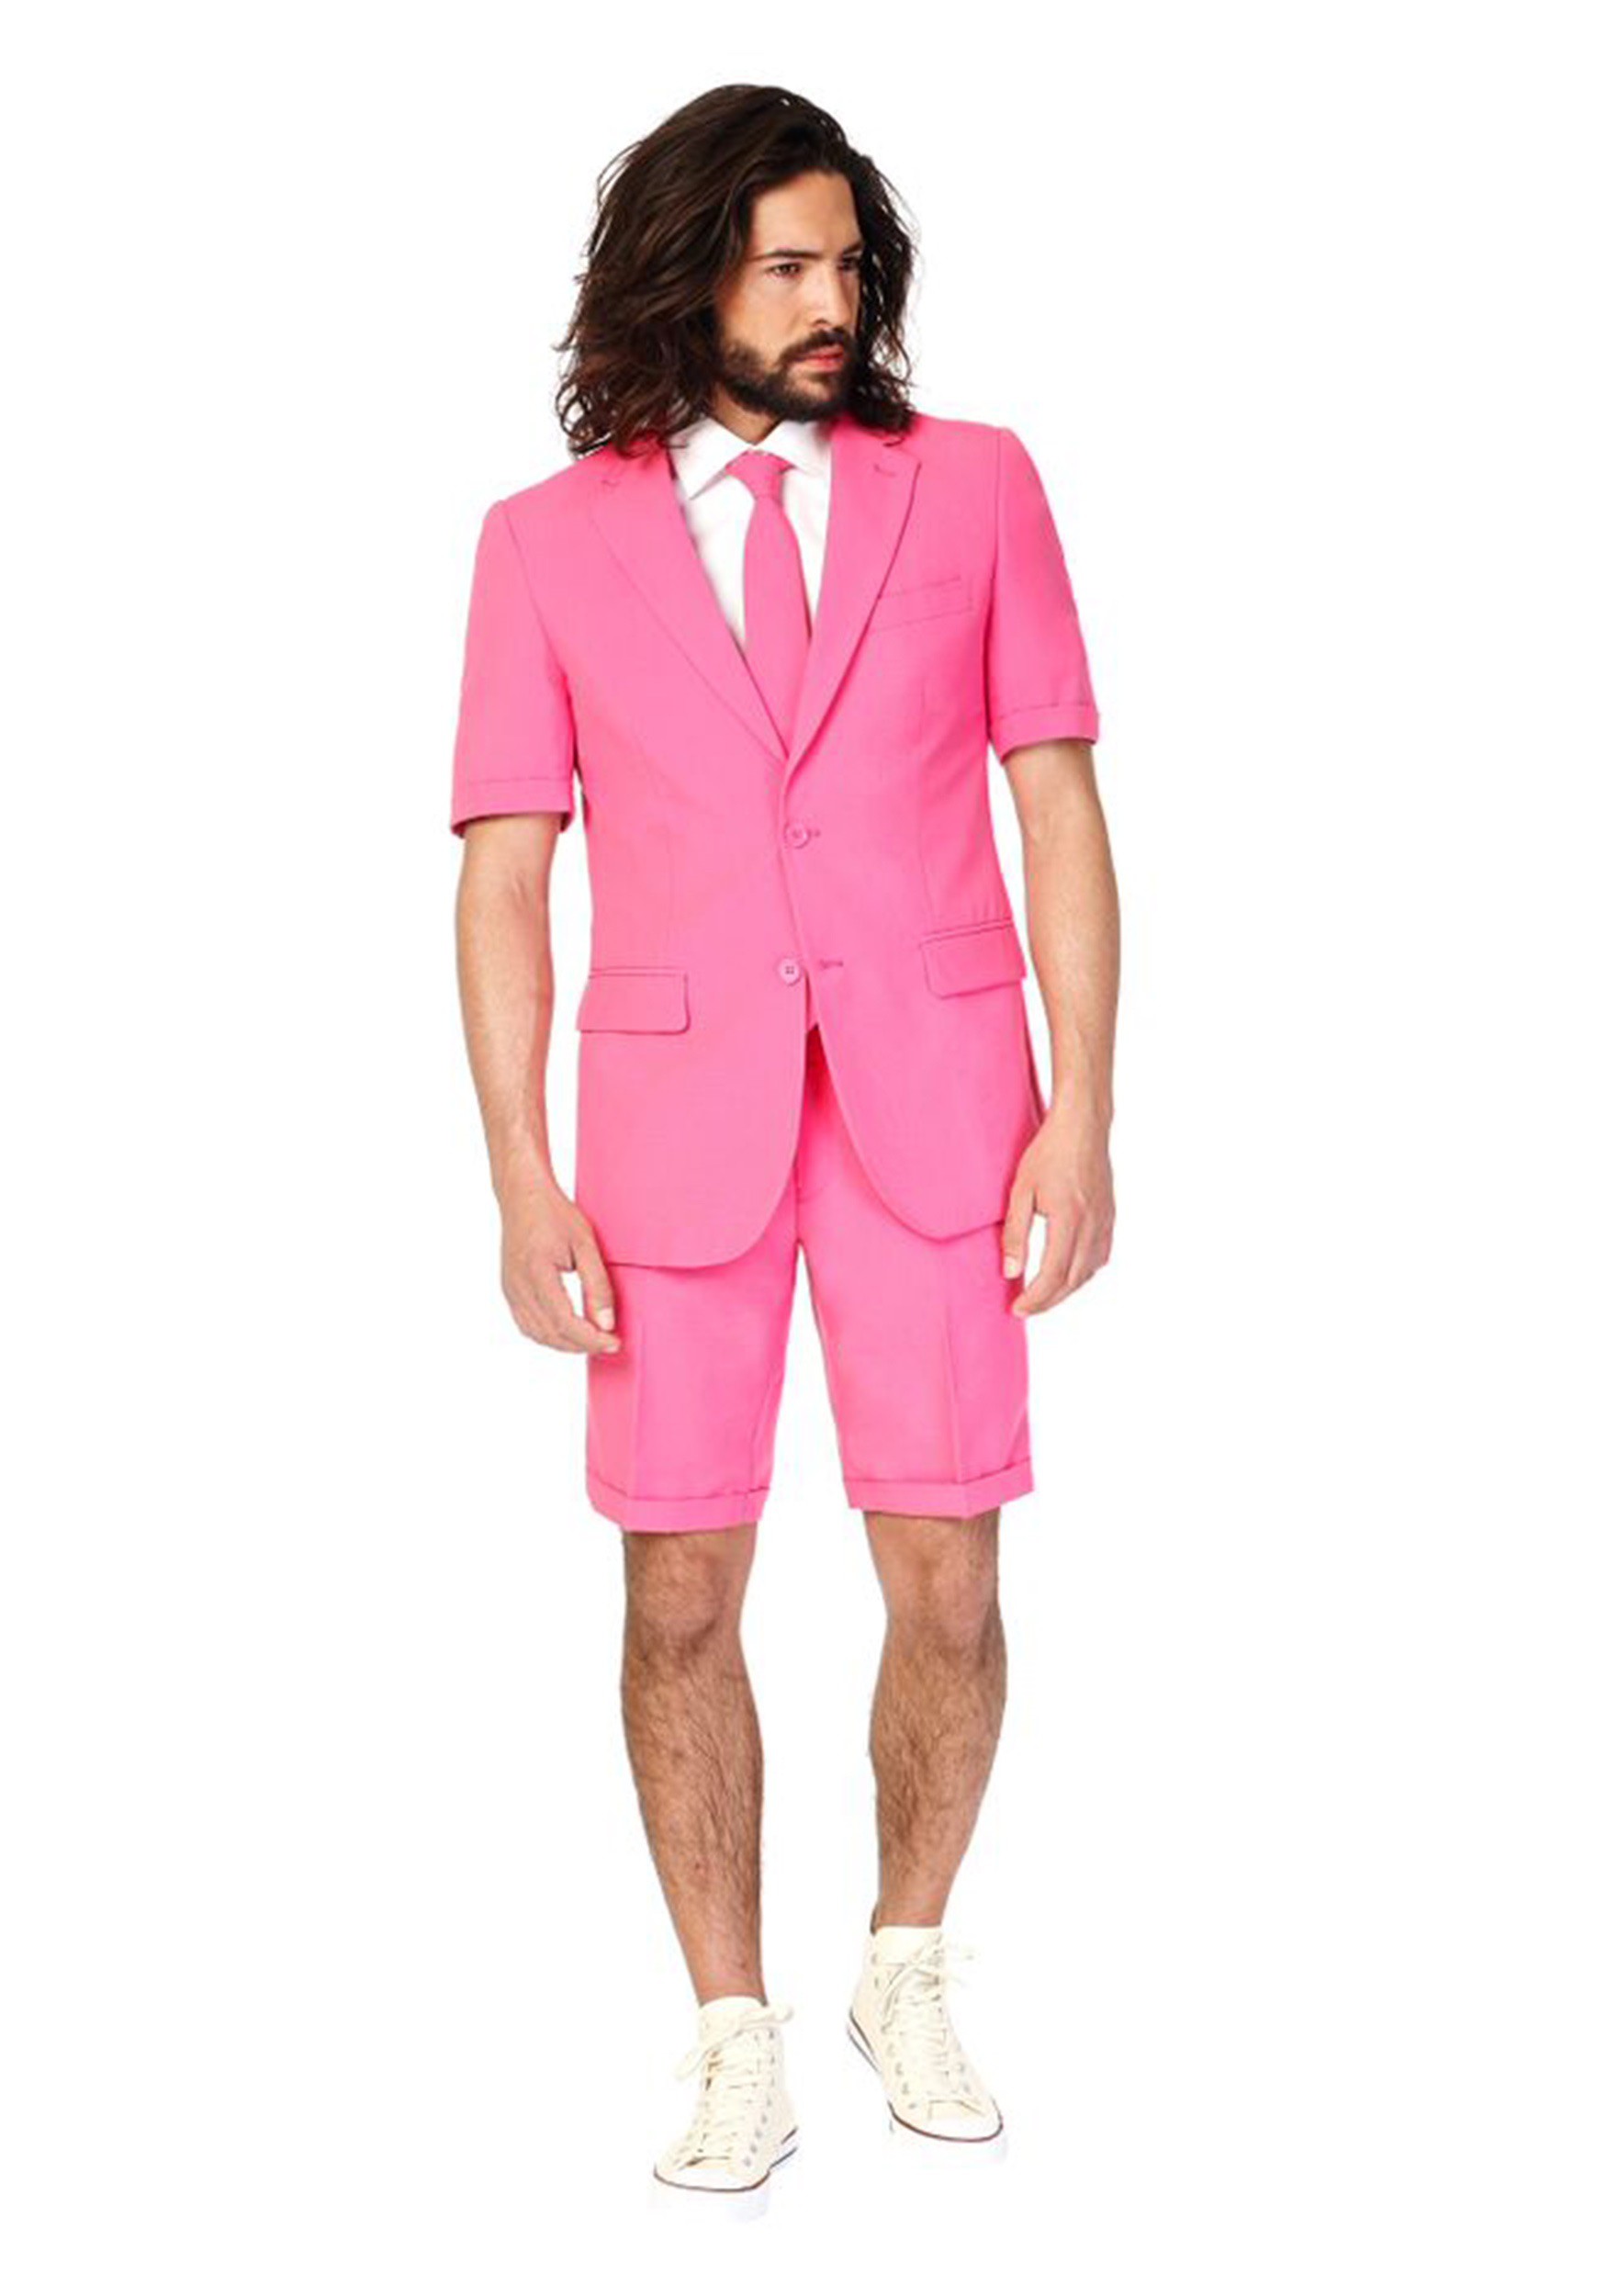 Image of OppoSuits Mr Pink Summer Suit Men's Costume ID OSOSUM0005-44